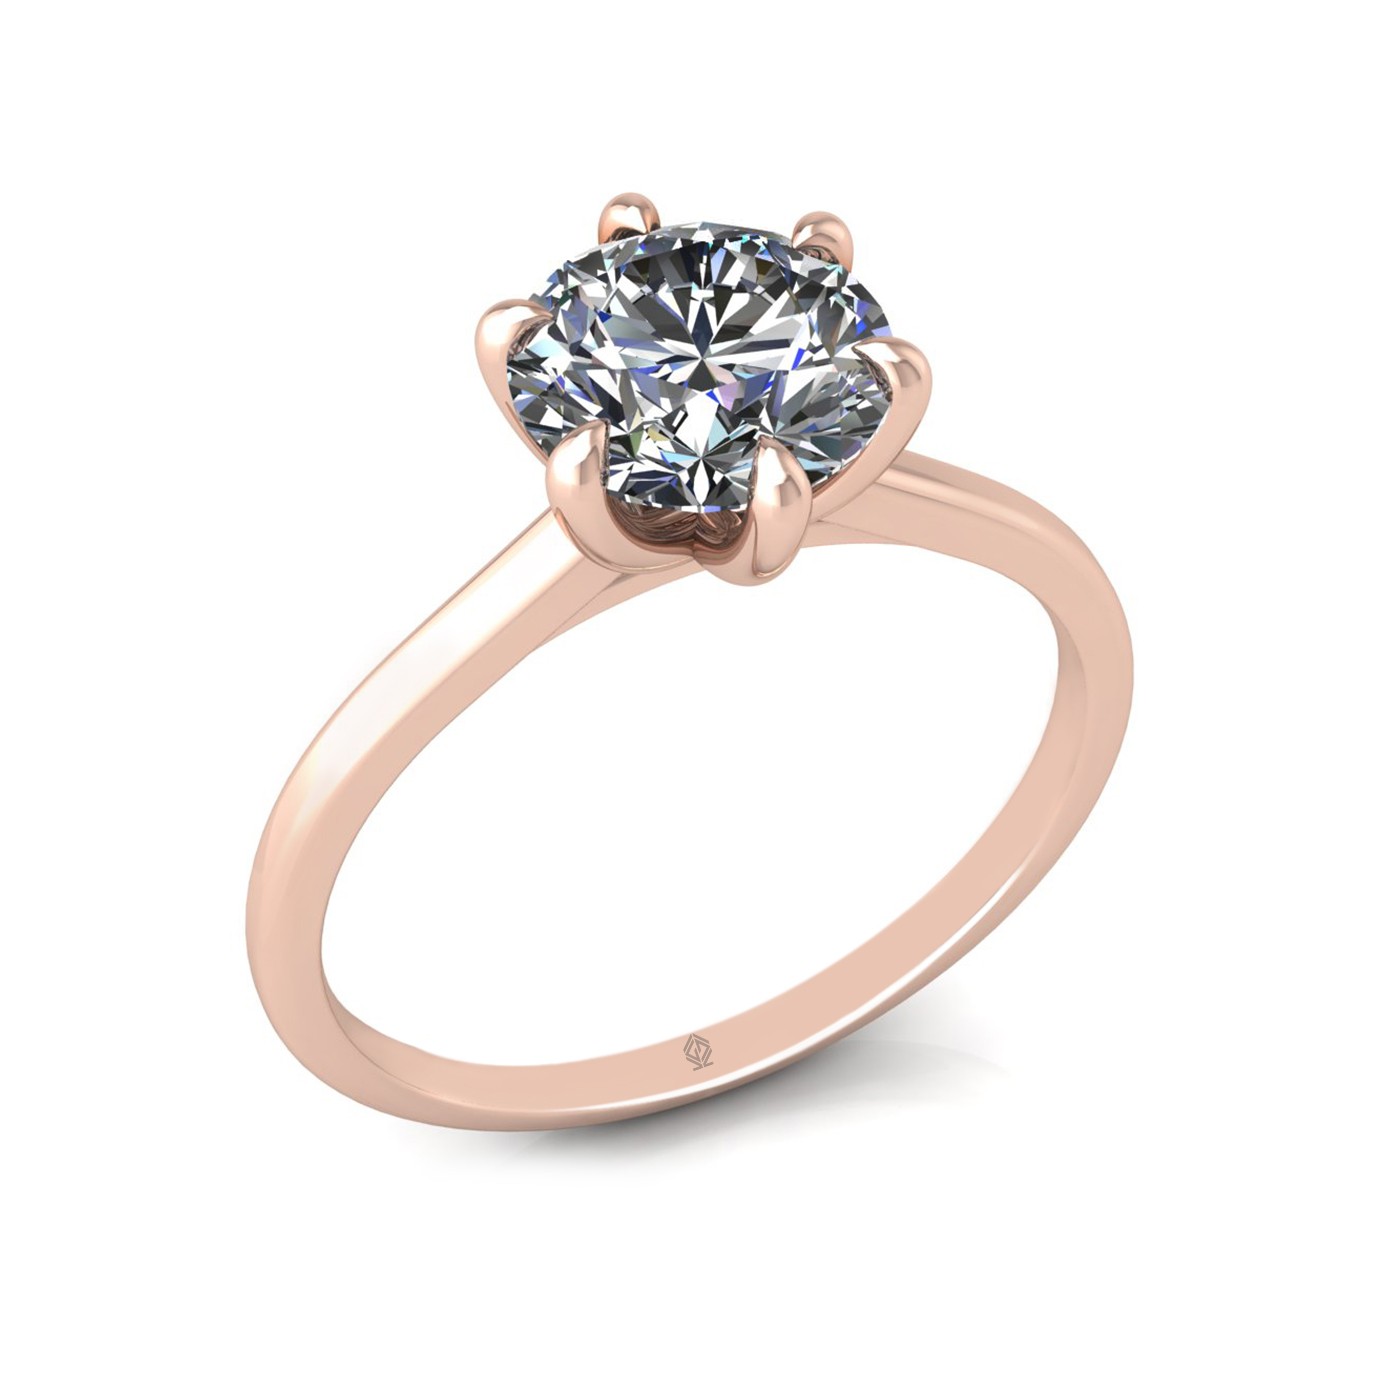 18k rose gold 1,50 ct 6 prongs solitaire round cut diamond engagement ring with whisper thin band